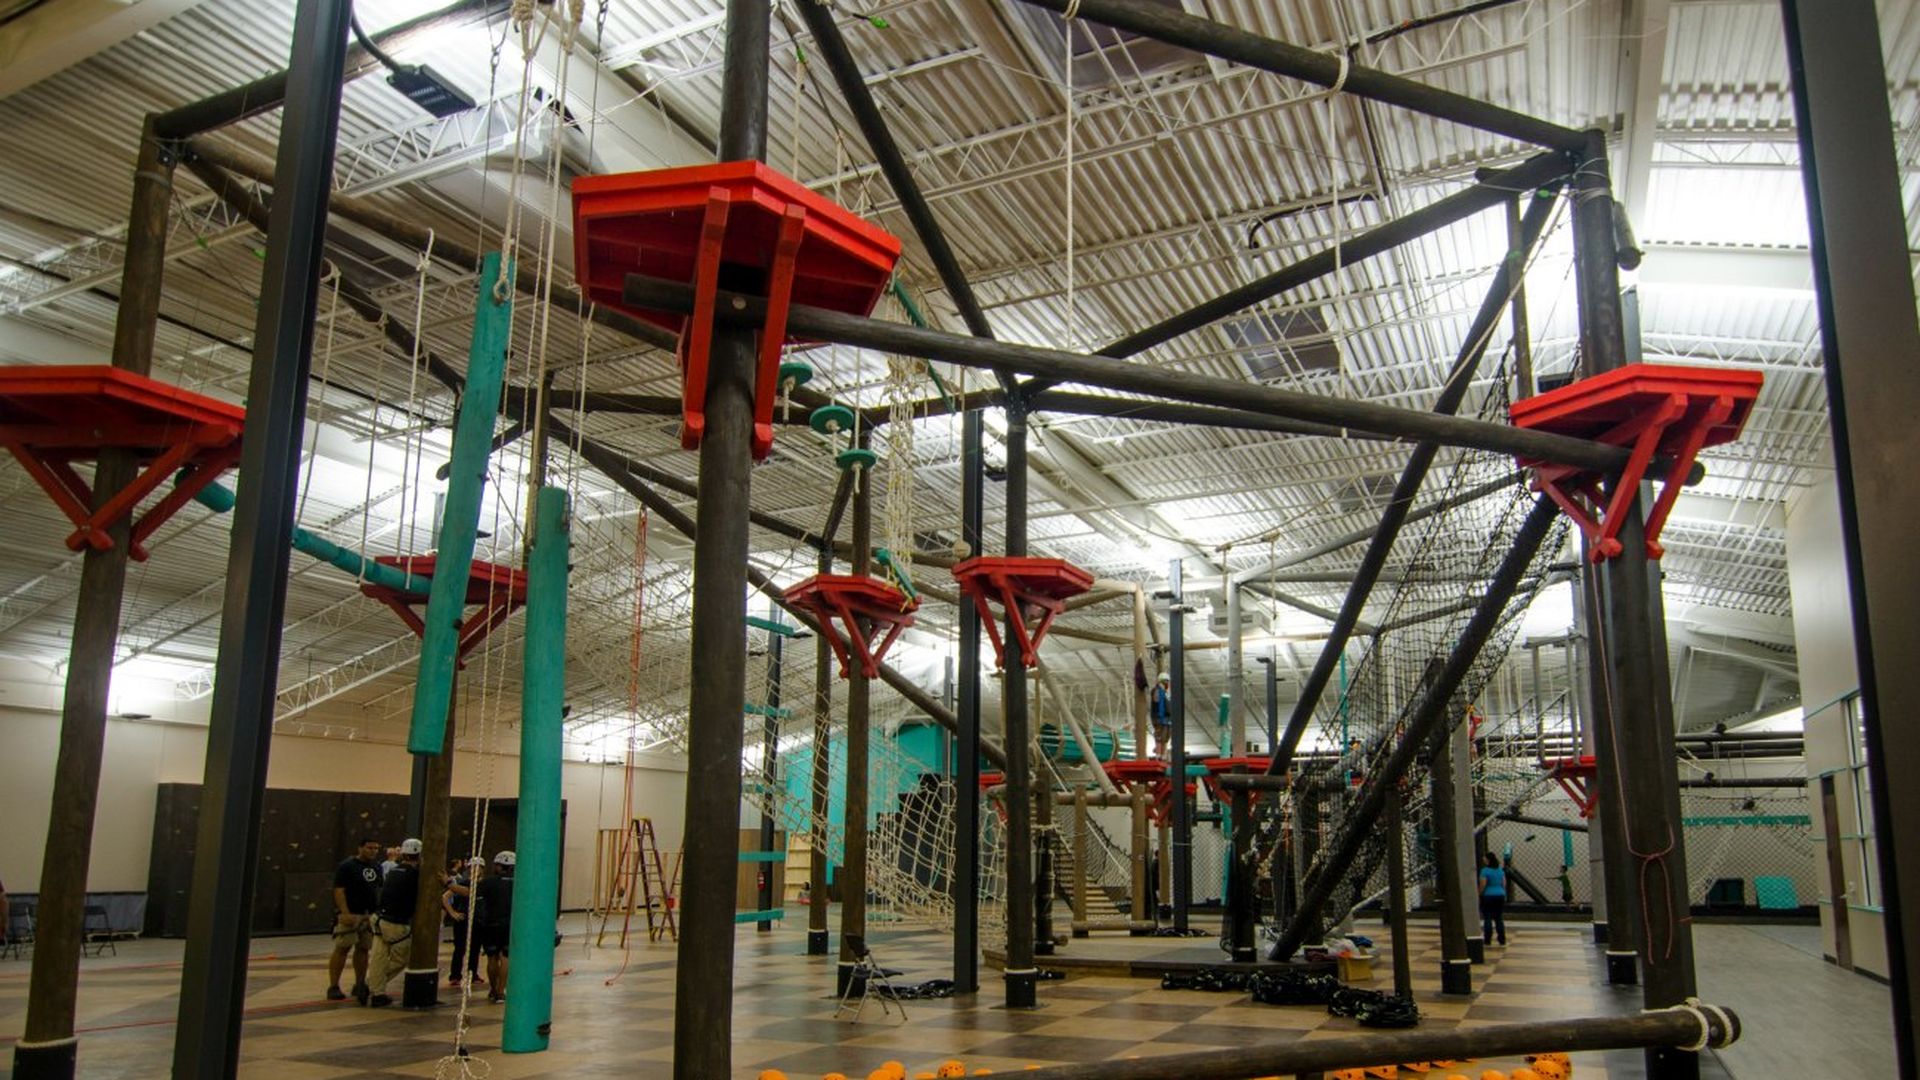 This 22,000-square-foot indoor obstacle course opens this weekend in south  Charlotte - Axios Charlotte